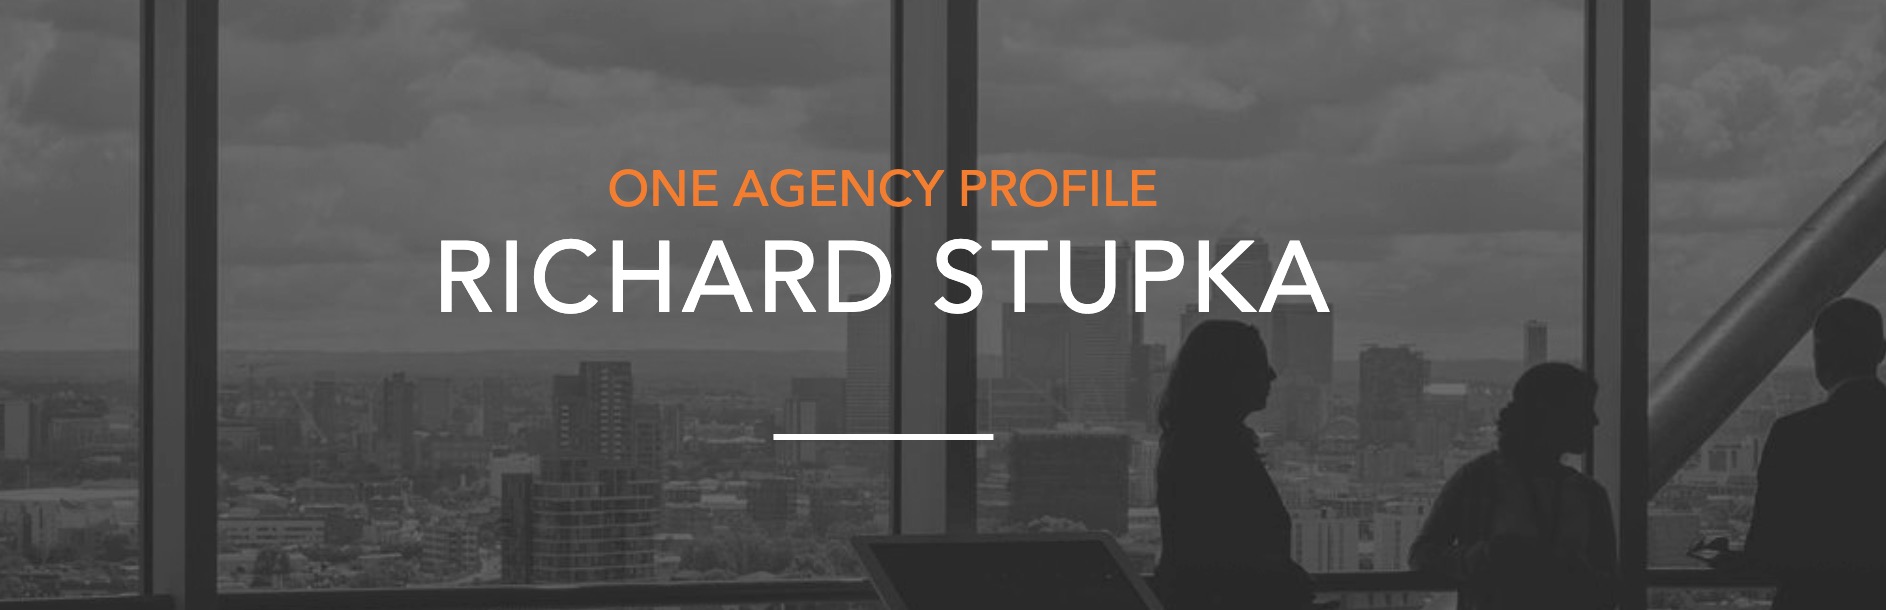 Richard Stupka is a licensed real estate agent and auctioneer at One Agency Longbeach. He uses StrategyX to put the structure in place for the long-term success of his start-up business.